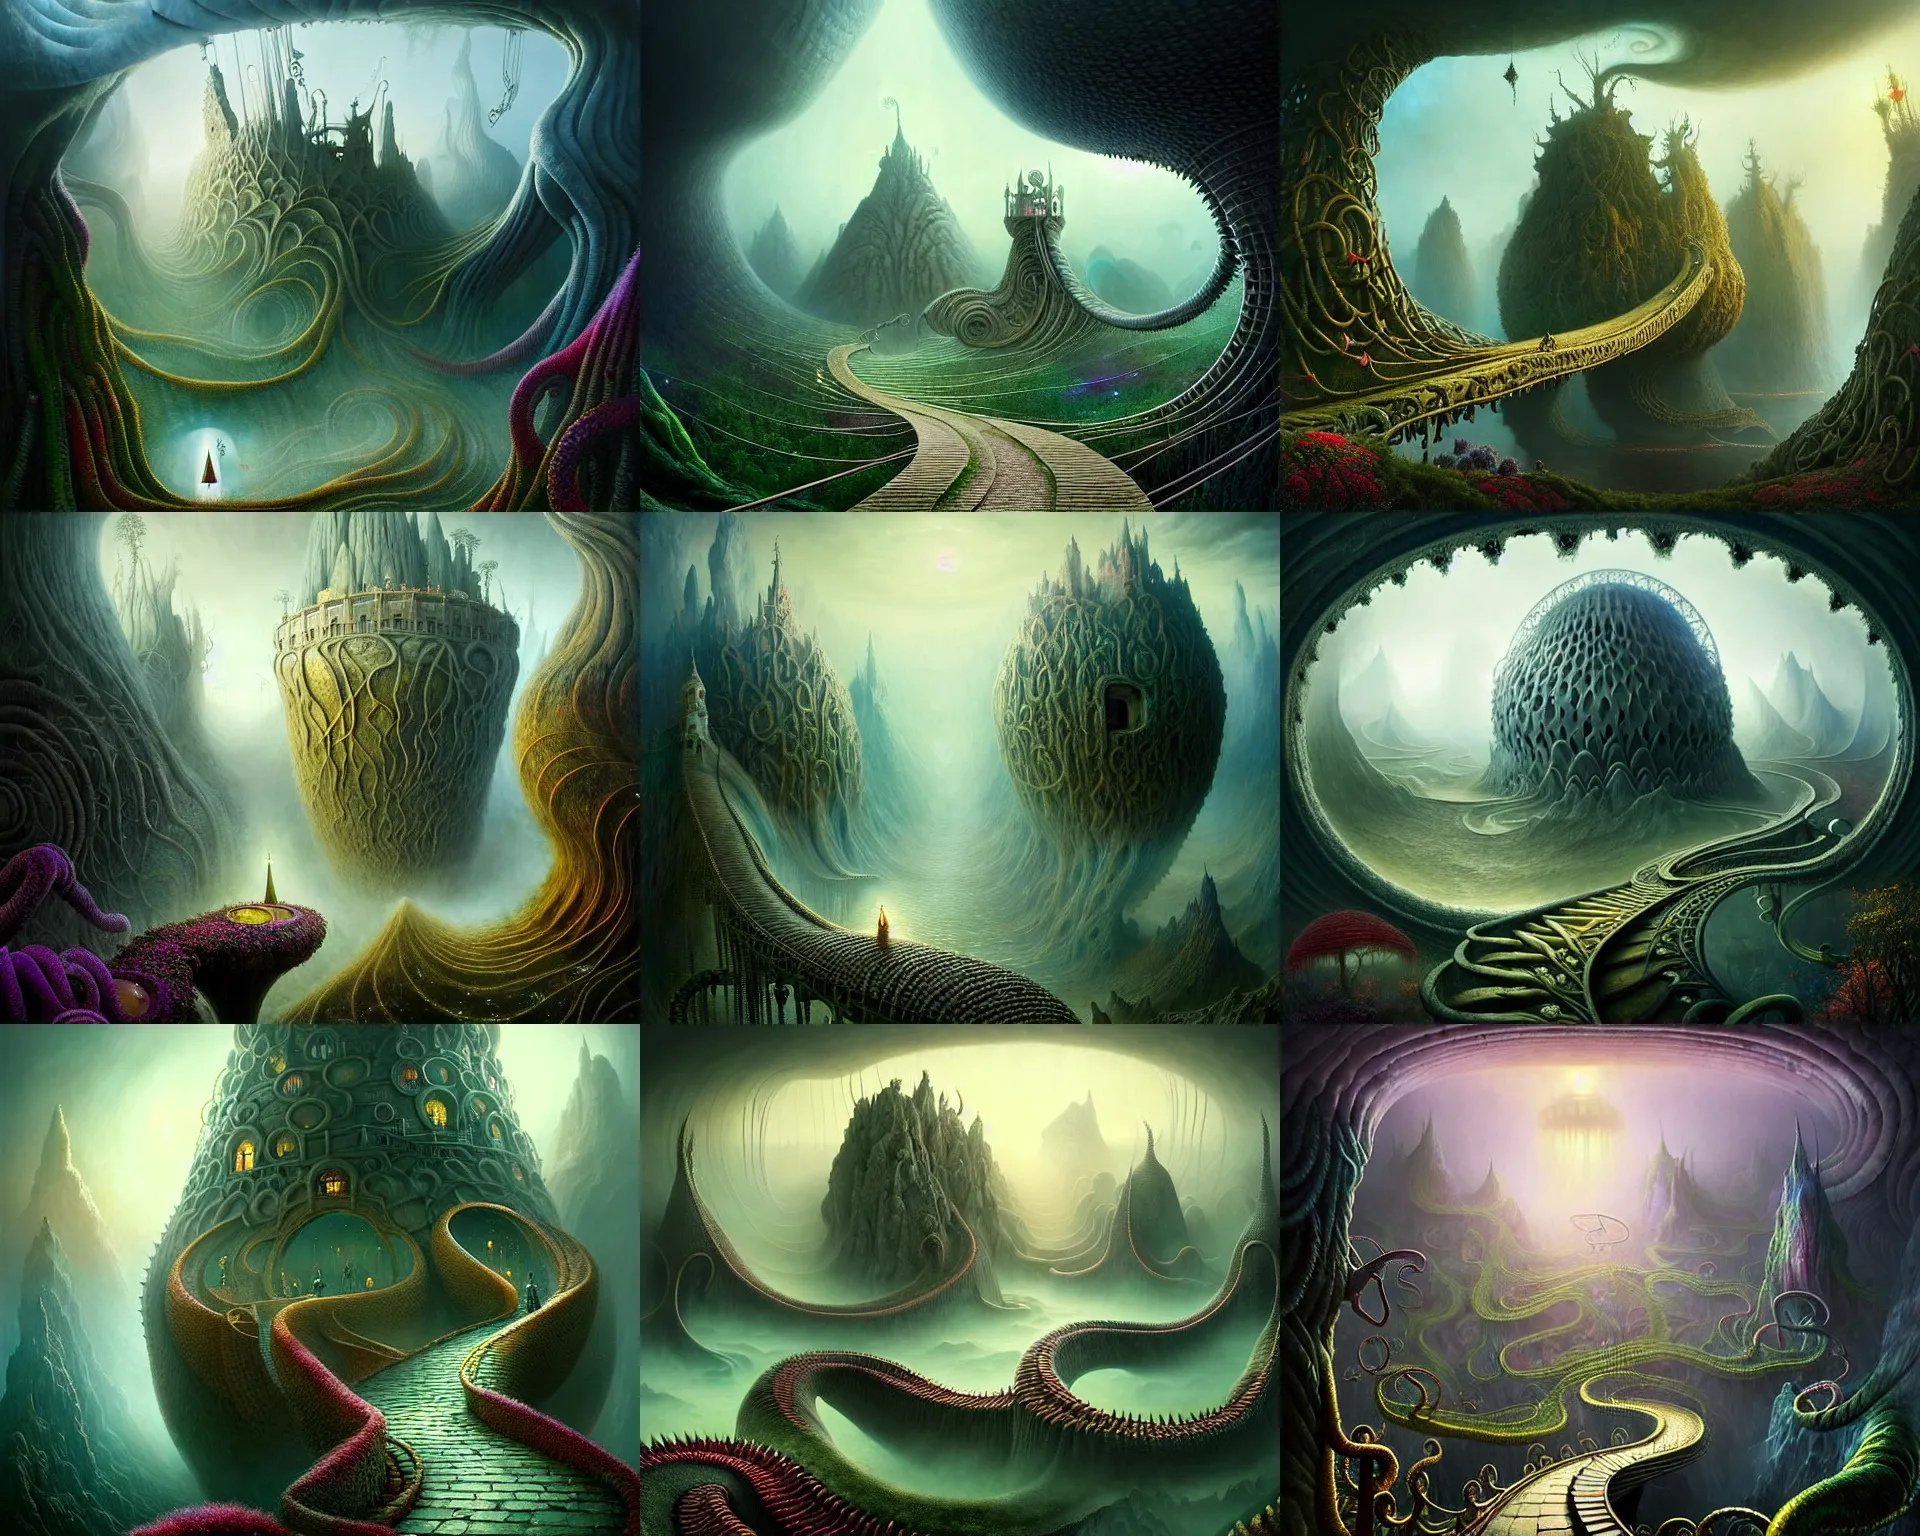 Prompt: a beguiling epic stunning beautiful and insanely detailed matte painting of the impossible winding path into lovecraftian dream worlds with surreal architecture designed by Heironymous Bosch, mega structures inspired by Heironymous Bosch's Garden of Earthly Delights, vast surreal landscape and horizon by Andree Wallin and Andrew Ferez and Cyril Rolando, masterpiece!!!, masterpiece!!!, grand!, imaginative!!!, whimsical!! intricate details, sense of awe, elite, wonder, insanely complex, masterful composition!!!, sharp focus, protagonist in foreground, fantasy realism, dramatic lighting